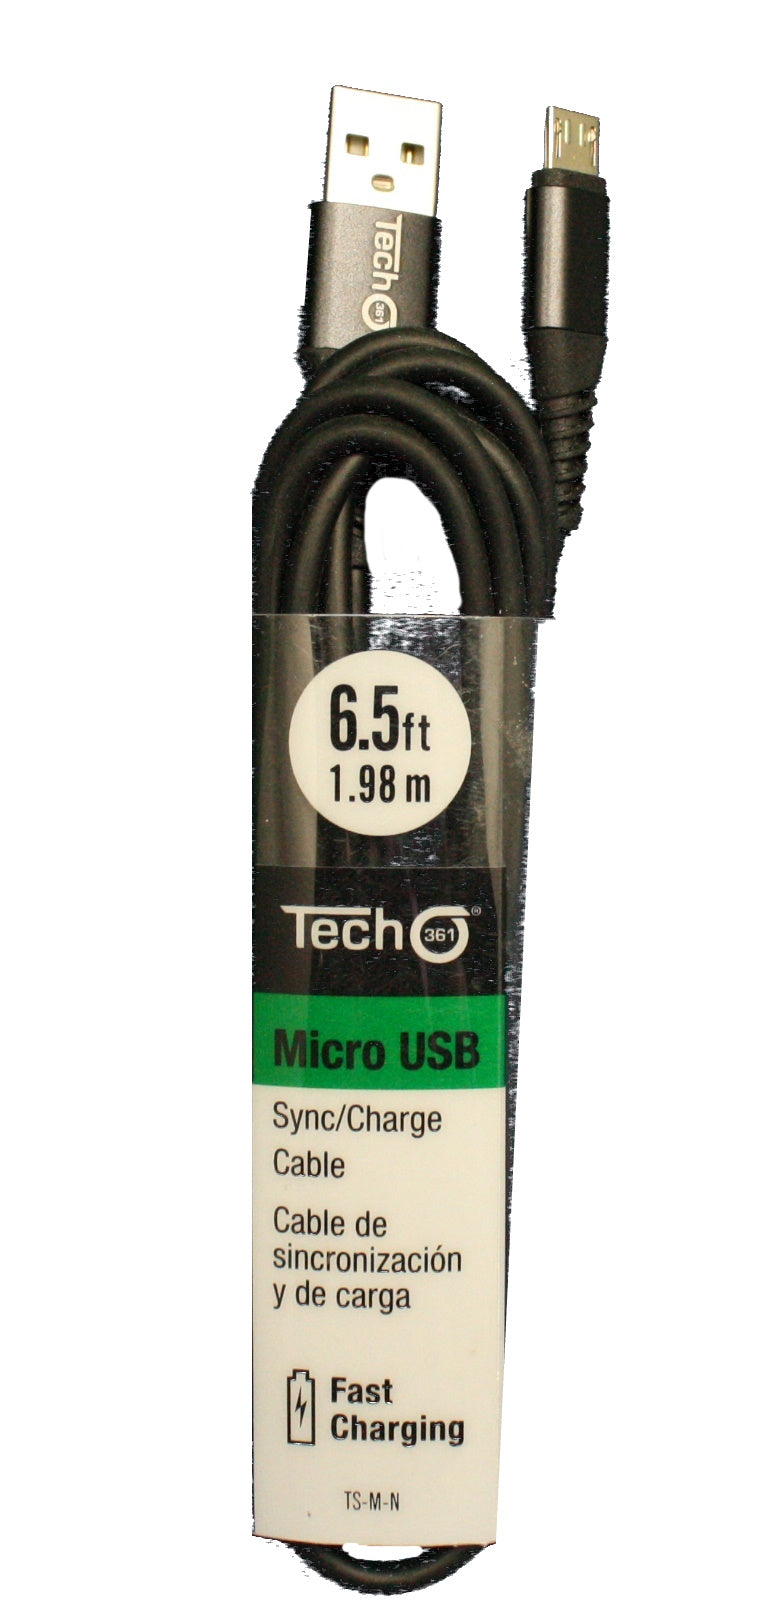 Micro USB 6.5 foot Sync/Charge Cable - Black - The Country Christmas Loft